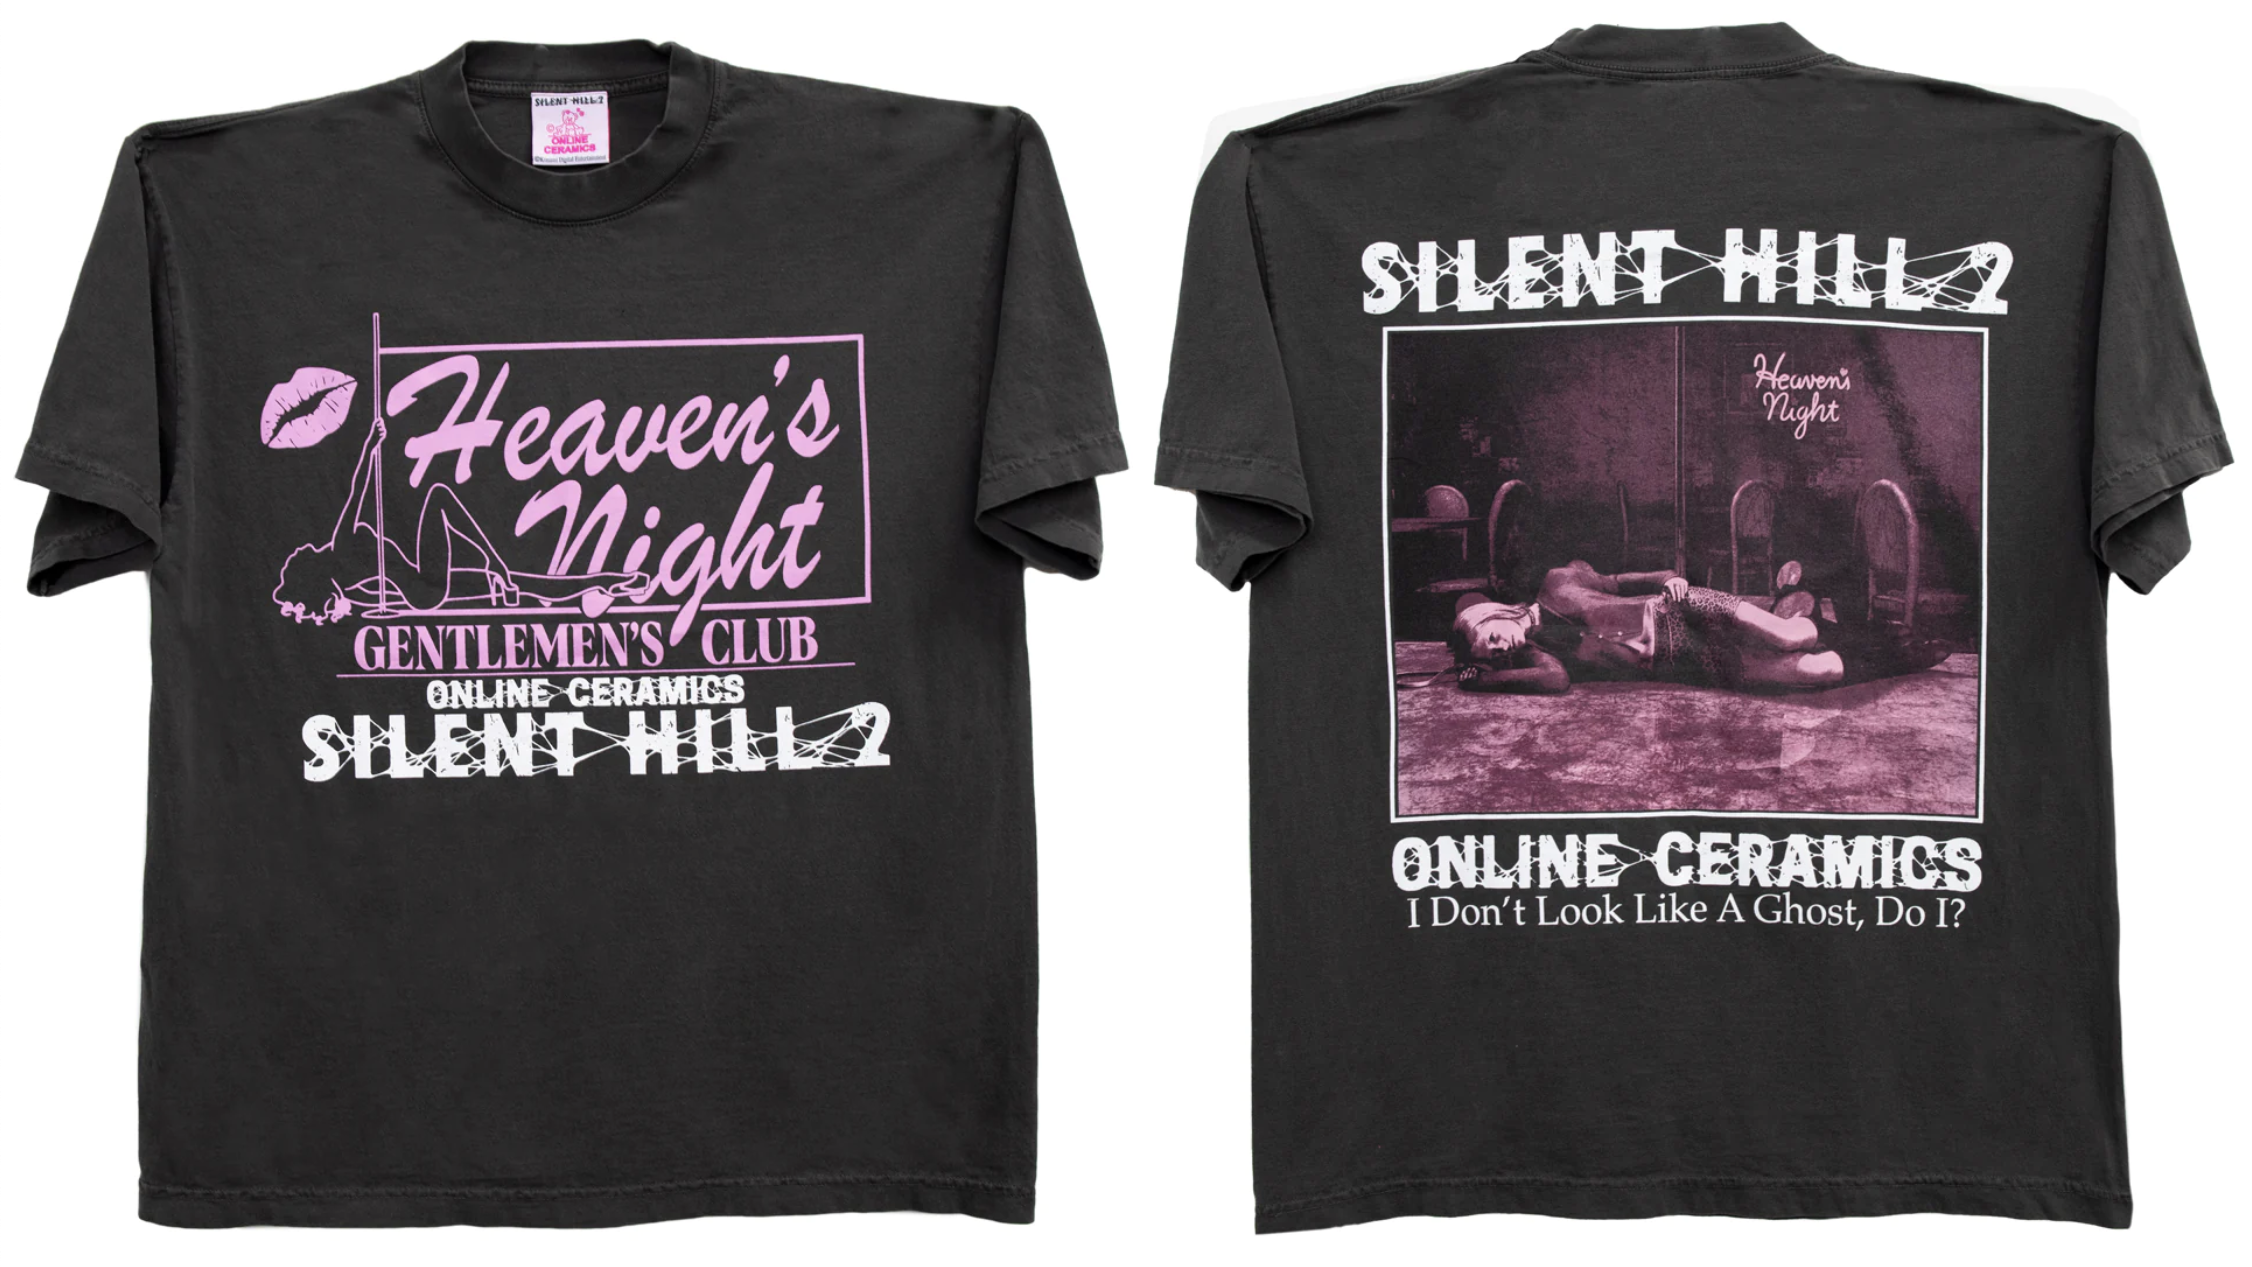 A t-shirt featuring the logo for the Heaven's Night Gentlemen's Club on one side, and on the other a picture of a woman collapse on the floor, above the quote 